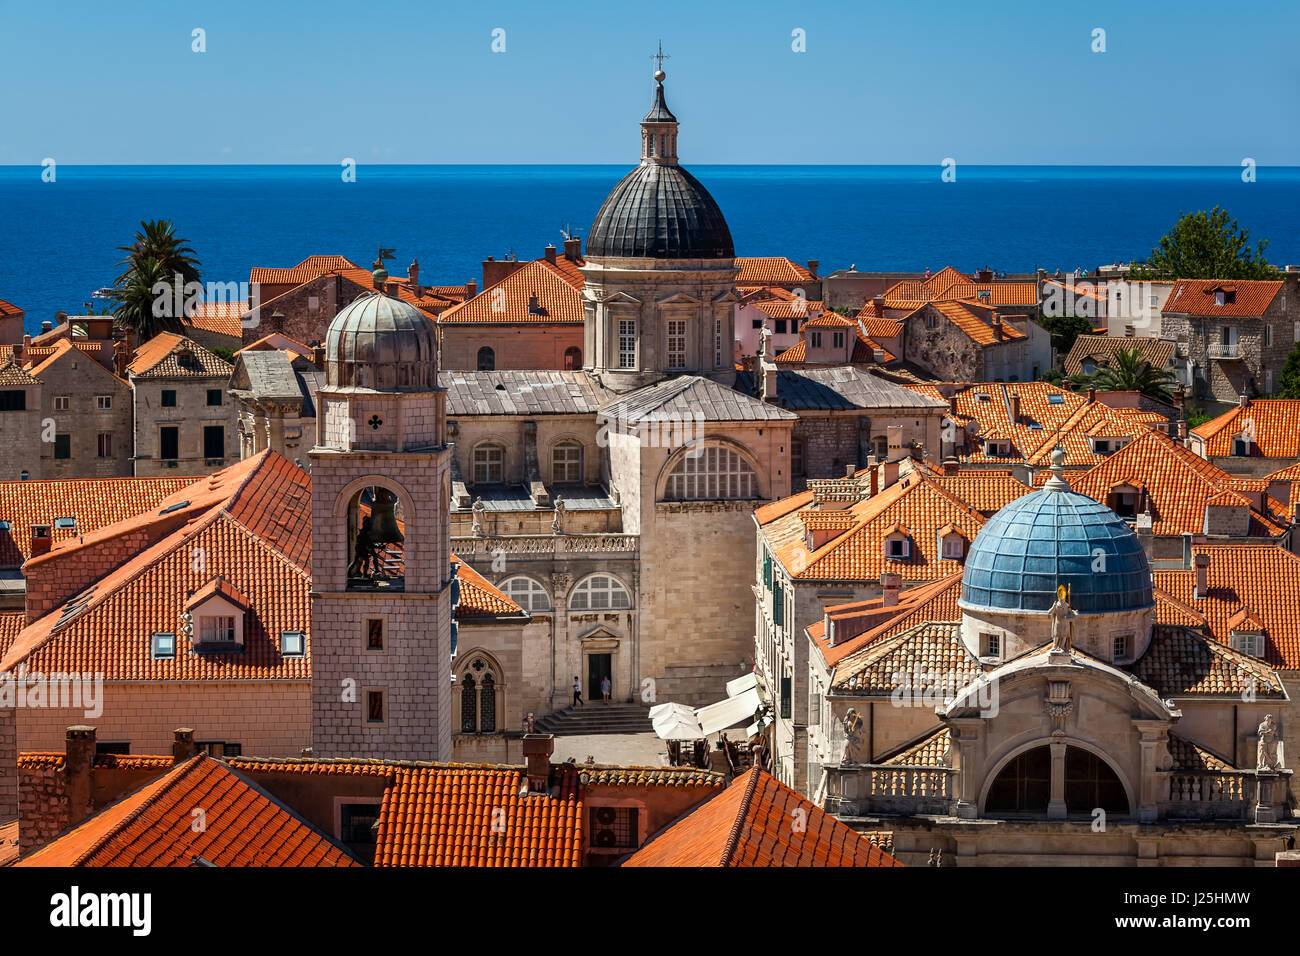 Aerial View of Luza Square, Saint Blaise Church and Assumption Cathedral from the City Walls, Dubrovnik, Croatia Stock Photo